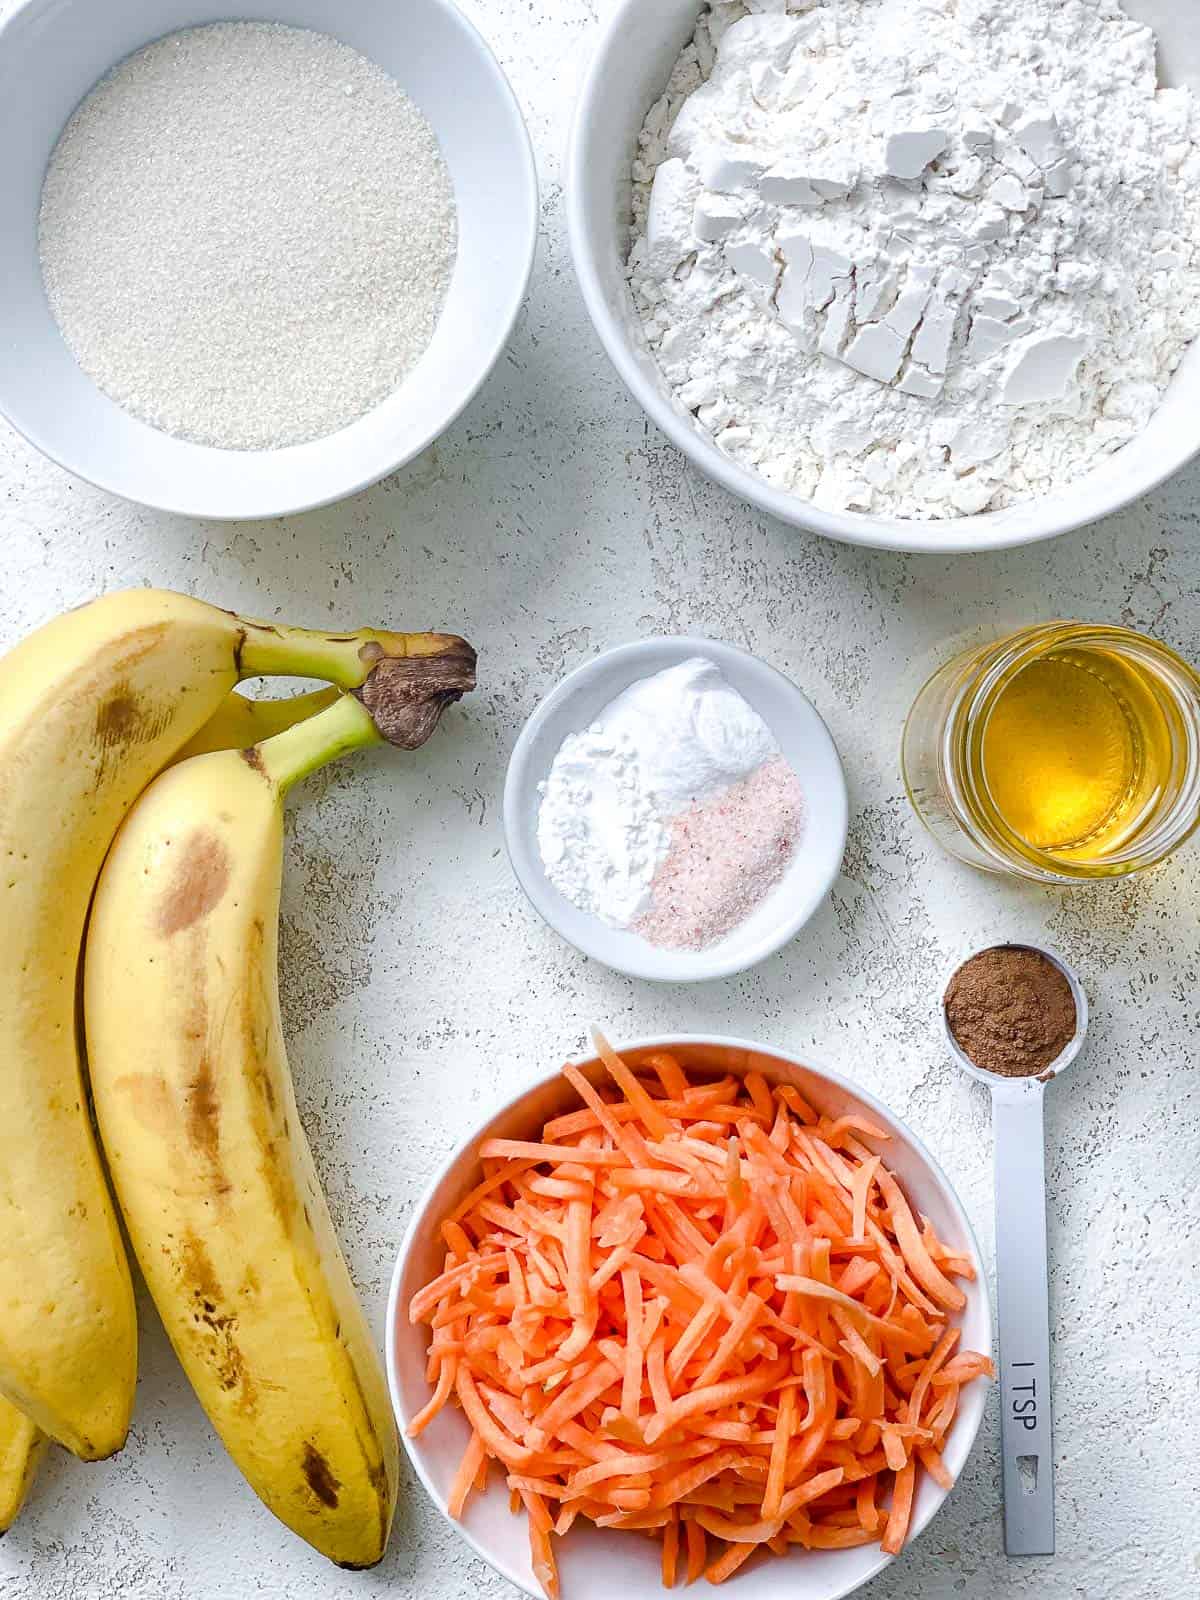 ingredients for Carrot Cake Muffins measured out against a white surface